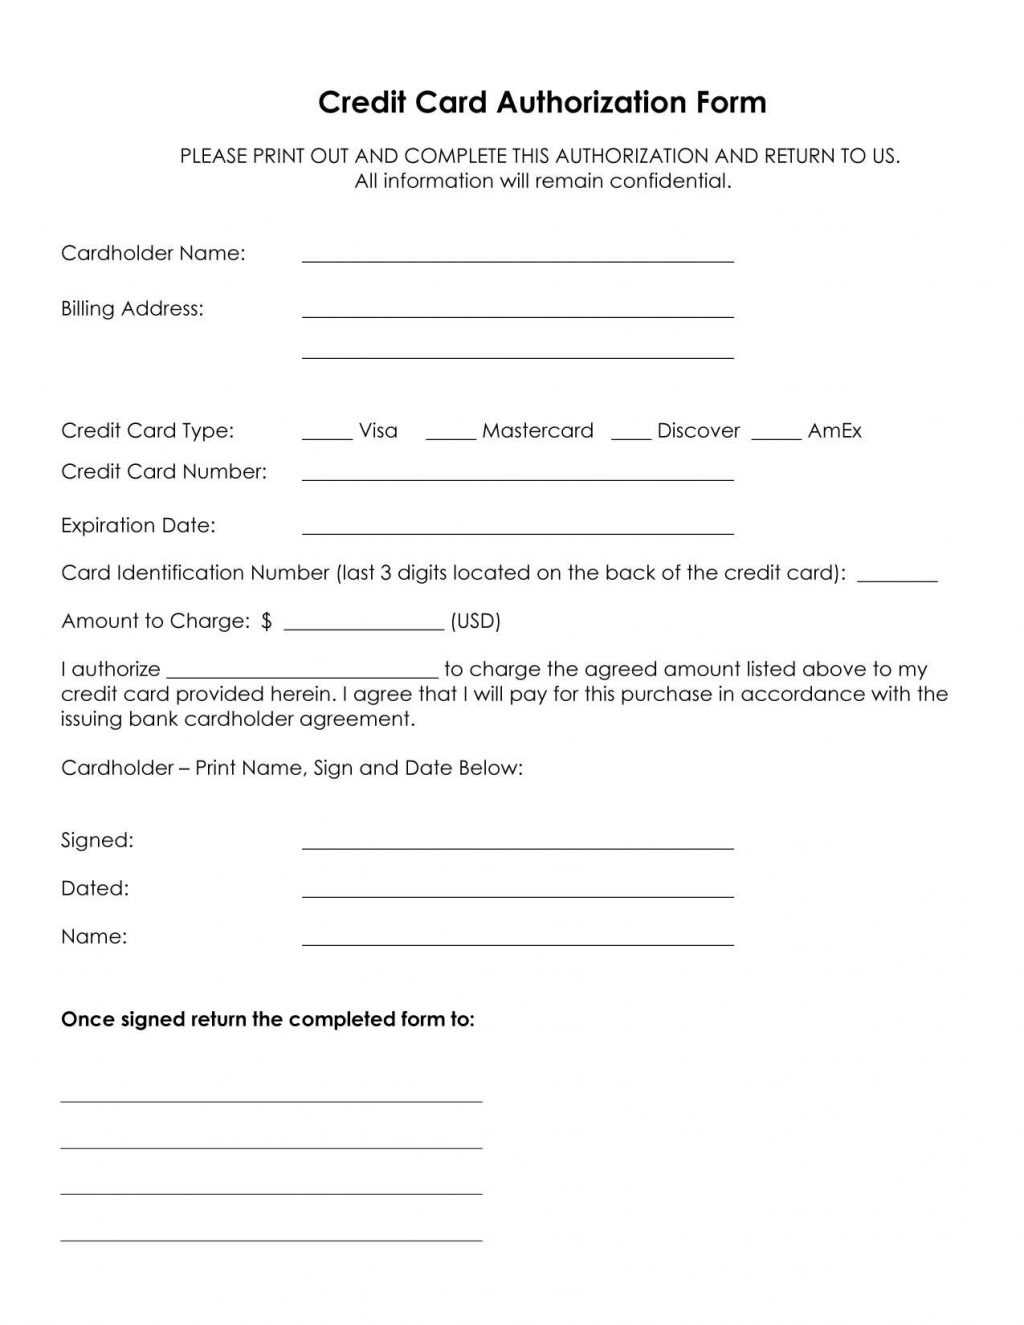 Credit Card Authorization Form Template In For Hotel Inside Order Form With Credit Card Template